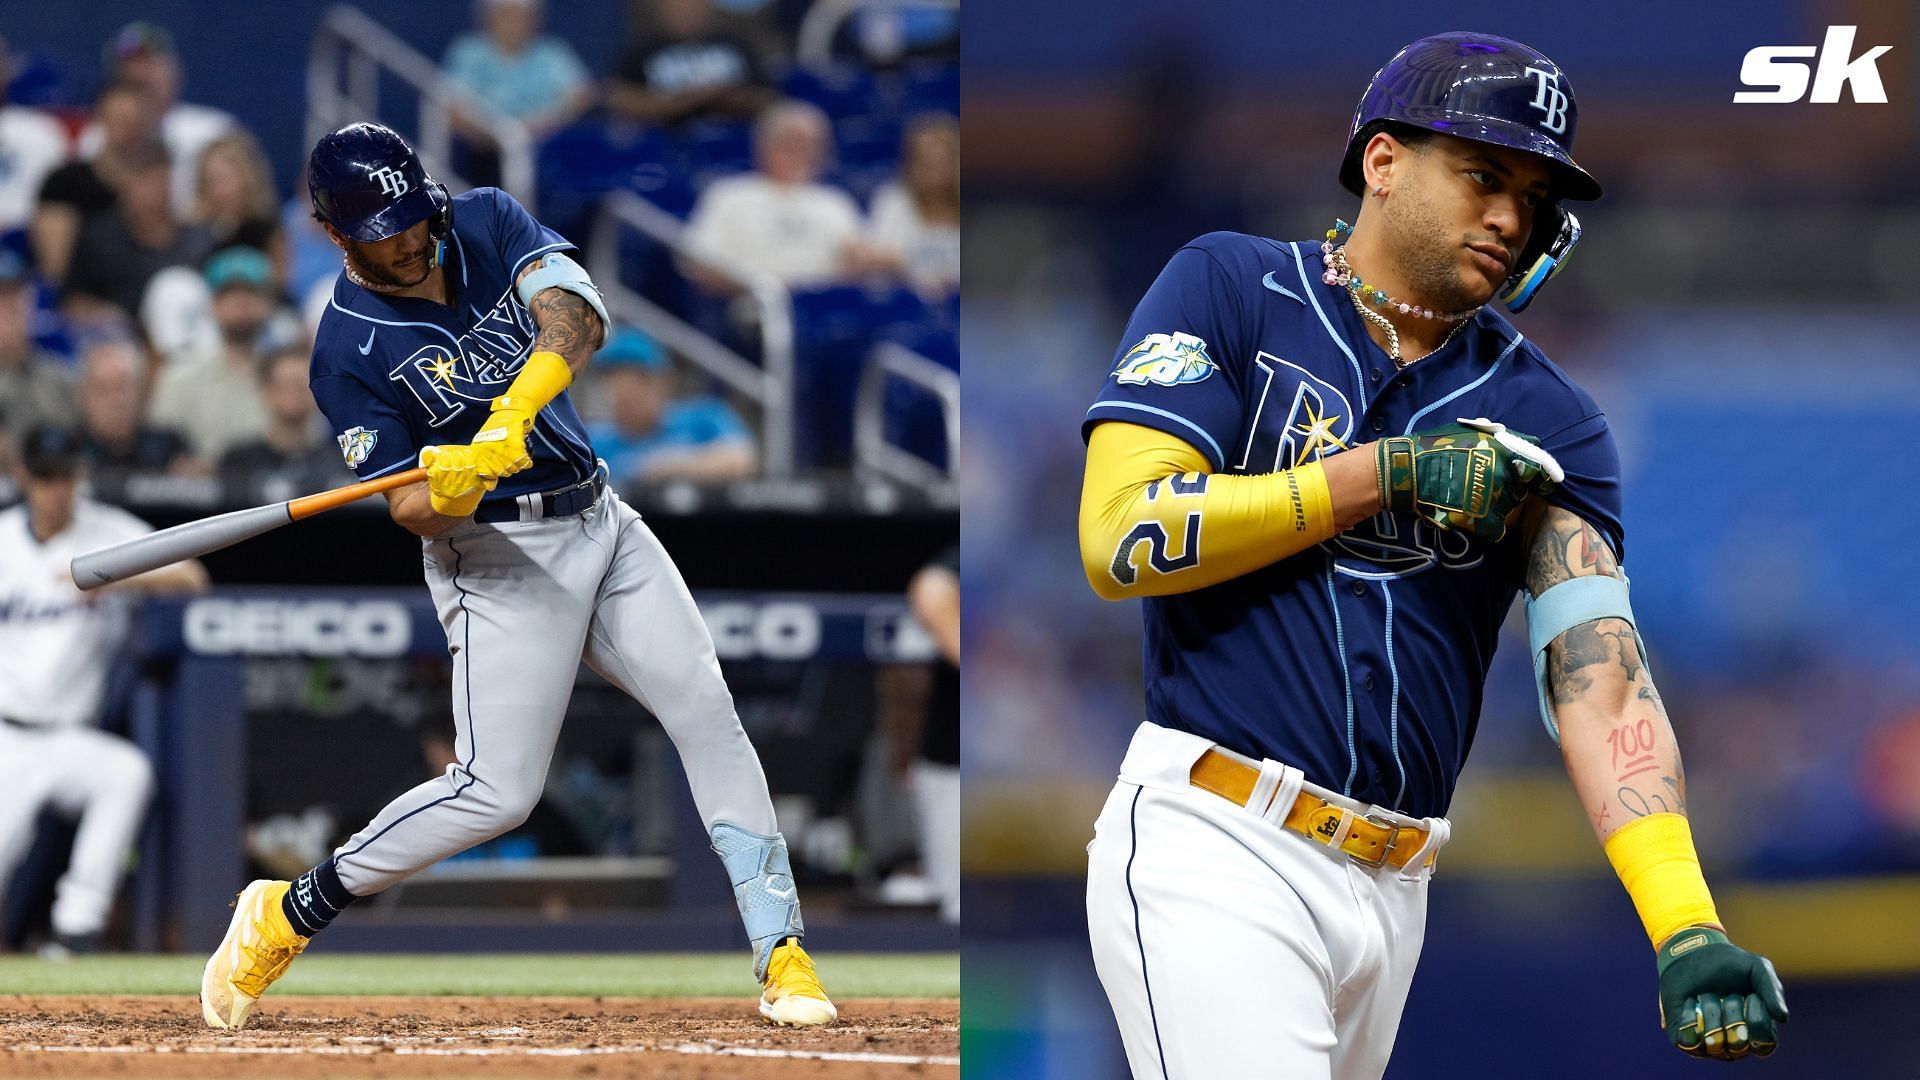 Jose Siri Injury Update: Rays OF sent for scans after being hit by rogue  pitch